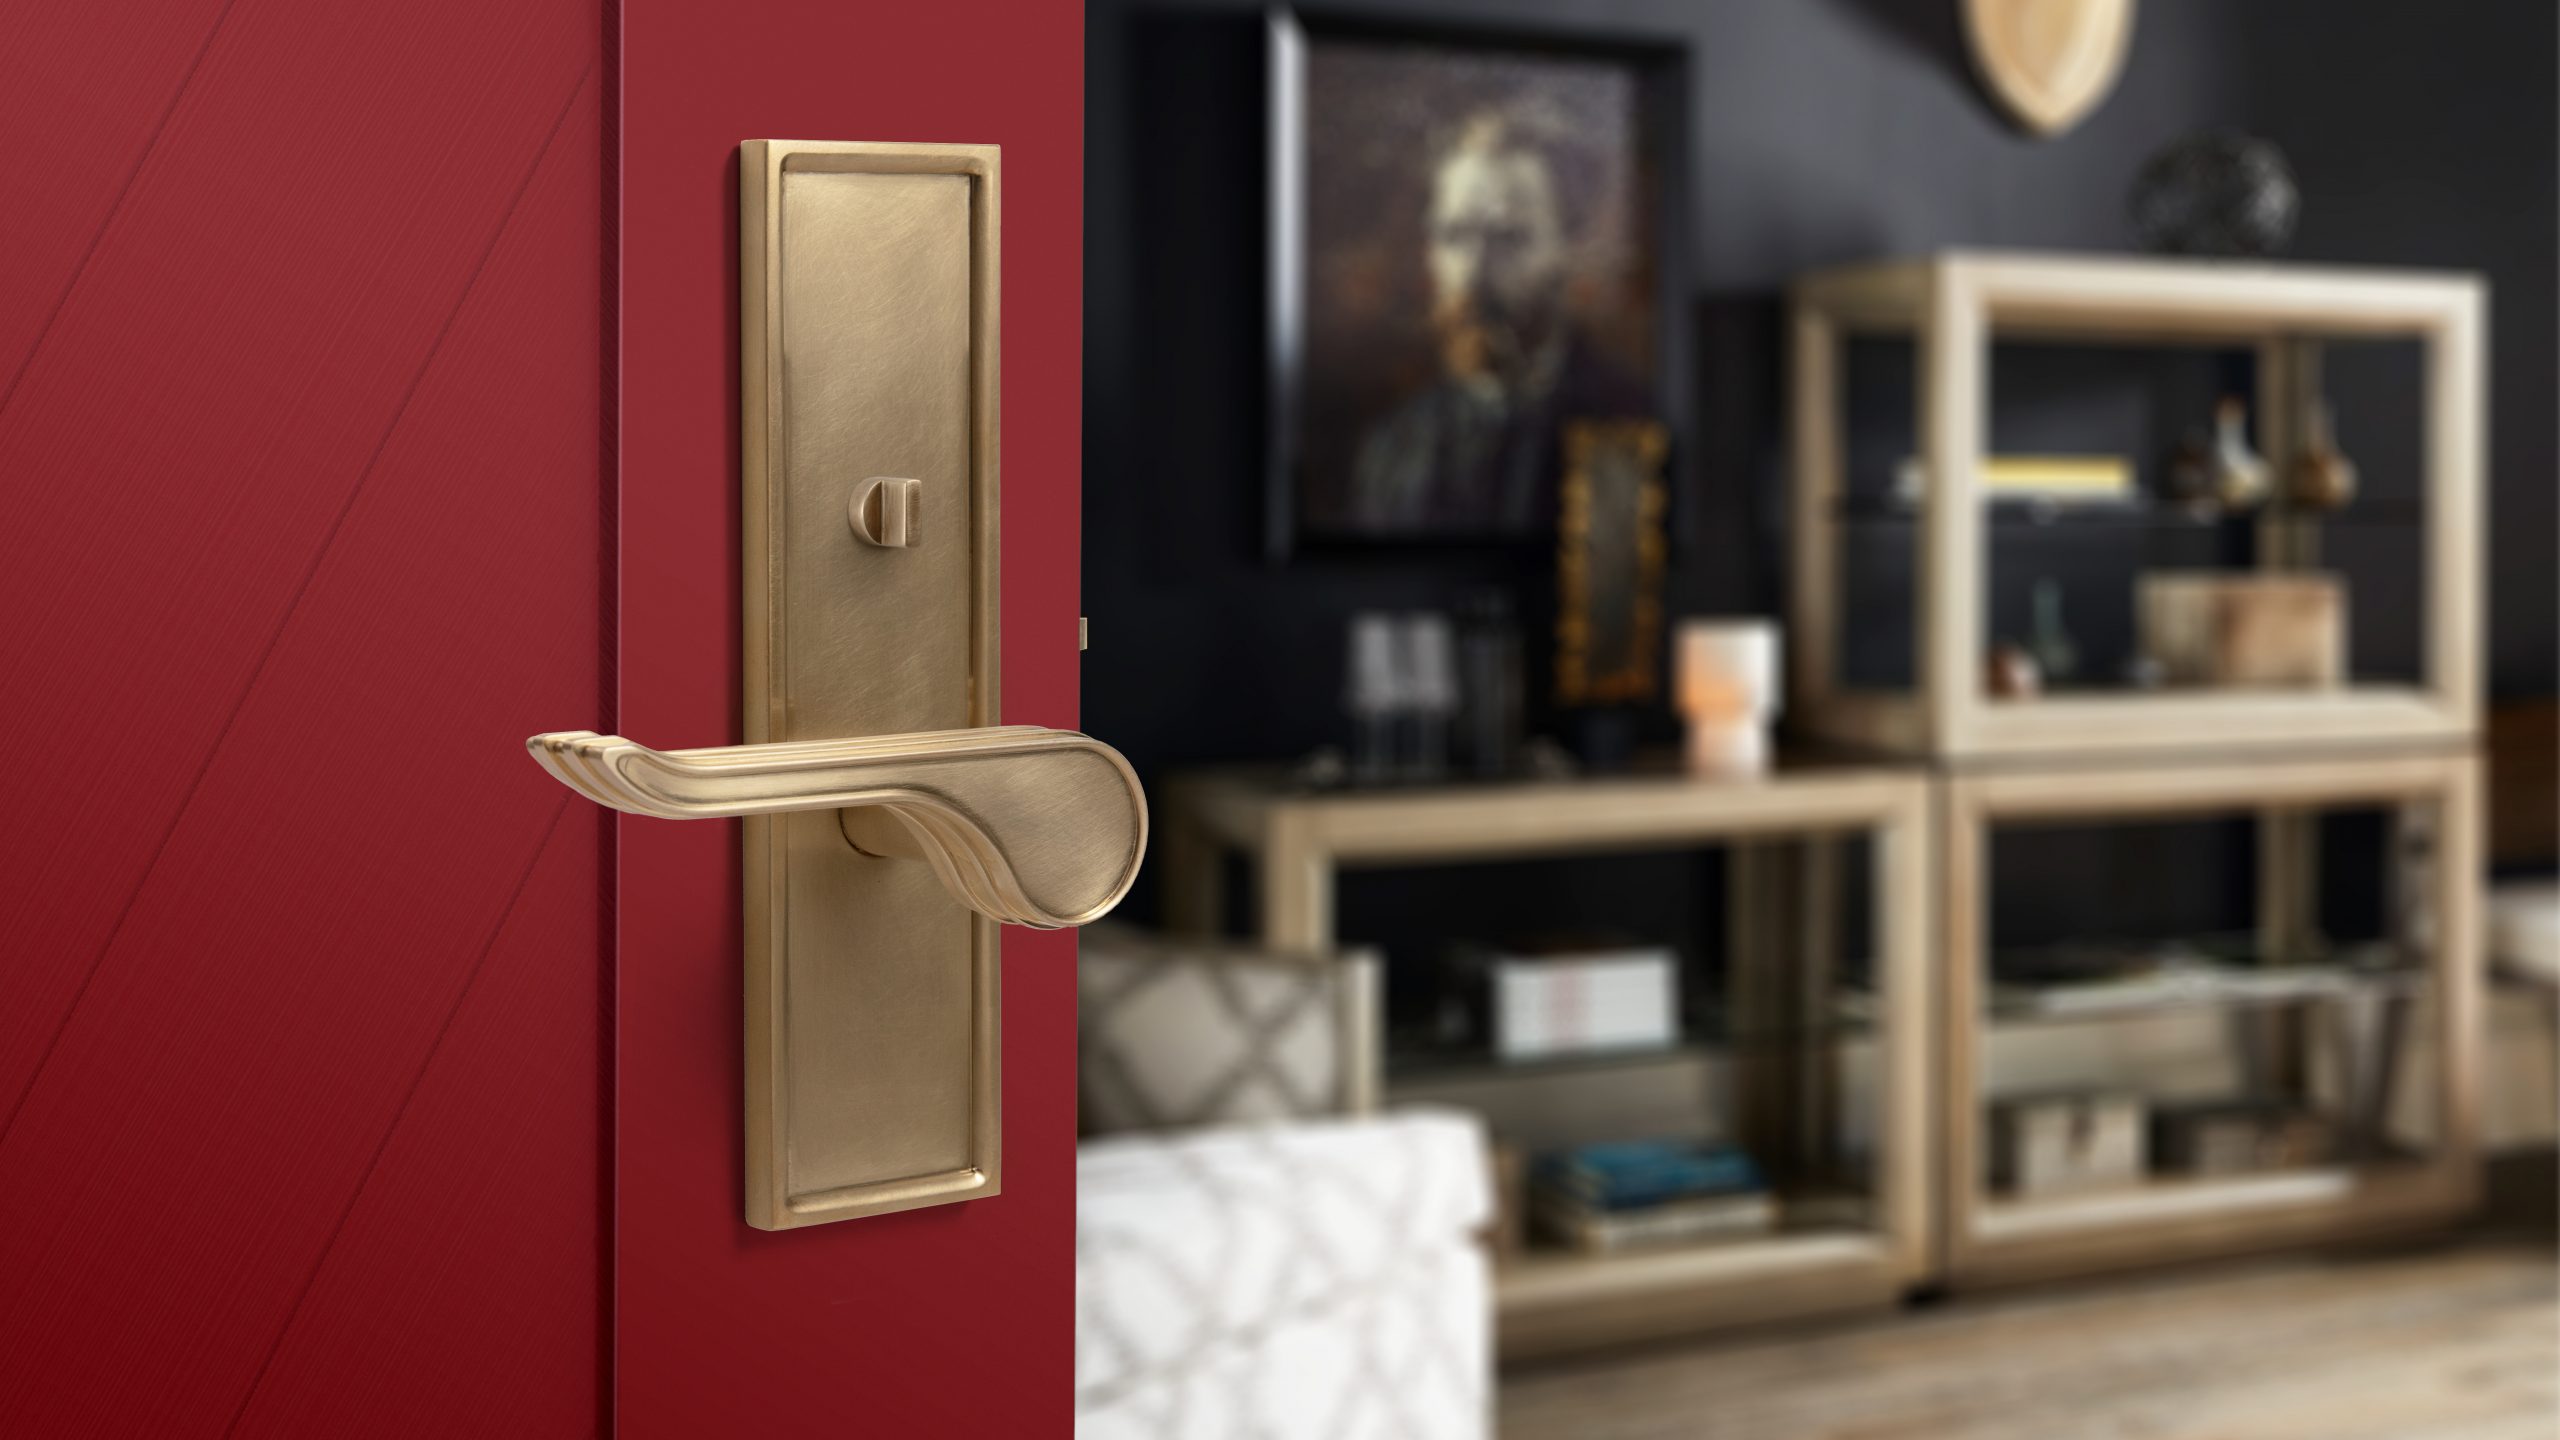 Influenced by the worlds of architecture, design, art and lifestyle, the Thom Filicia for Accurate collection of hardware features a balanced and inspired combination of thoughtfully executed details.  Pairing design with the industry’s finest manufacturing technologies at Accurate Lock 